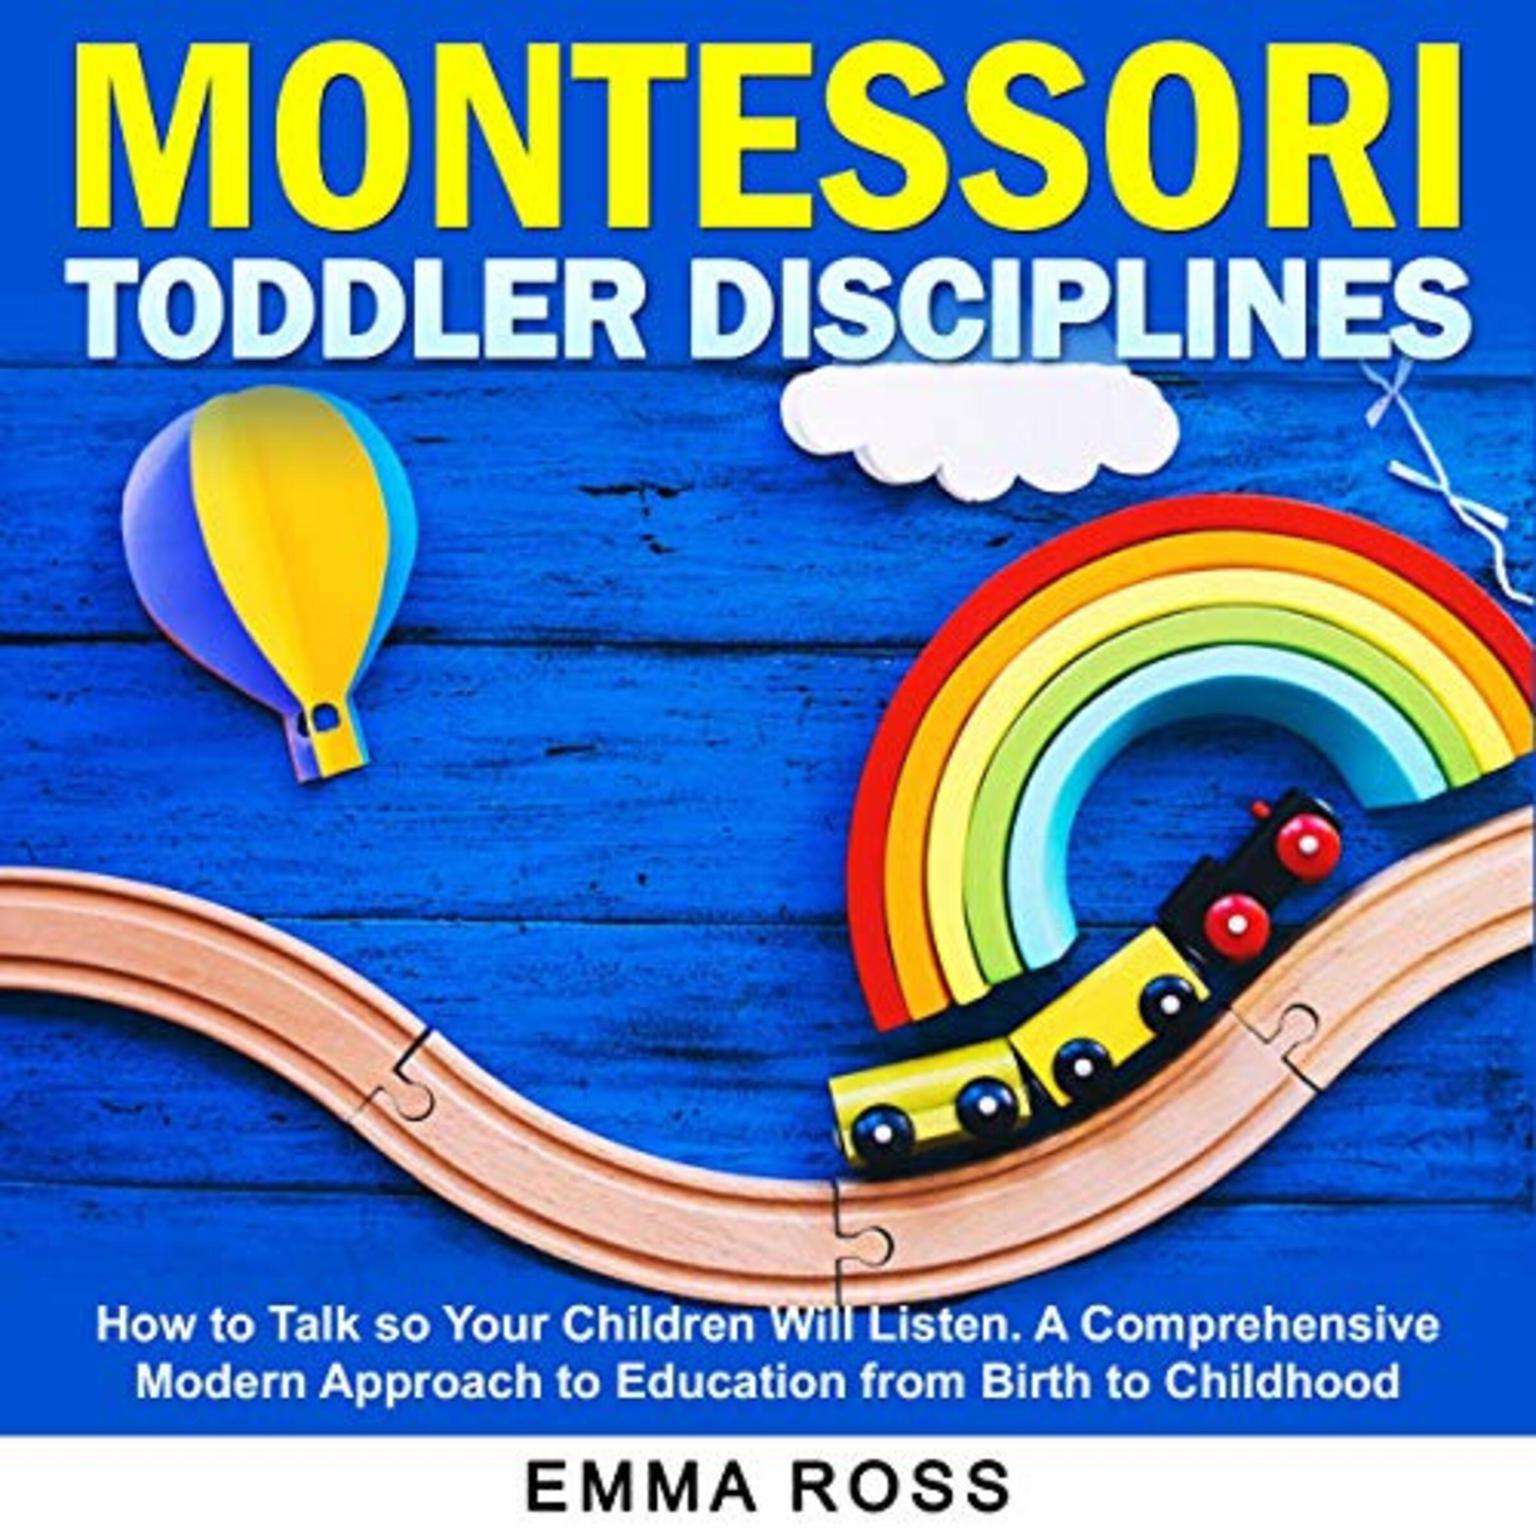 Montessori Toddler Disciplines (Abridged): How to Talk so Your Children Will Listen. A Comprehensive Modern Approach to Education from Birth to Childhood. Audiobook, by Emma Ross